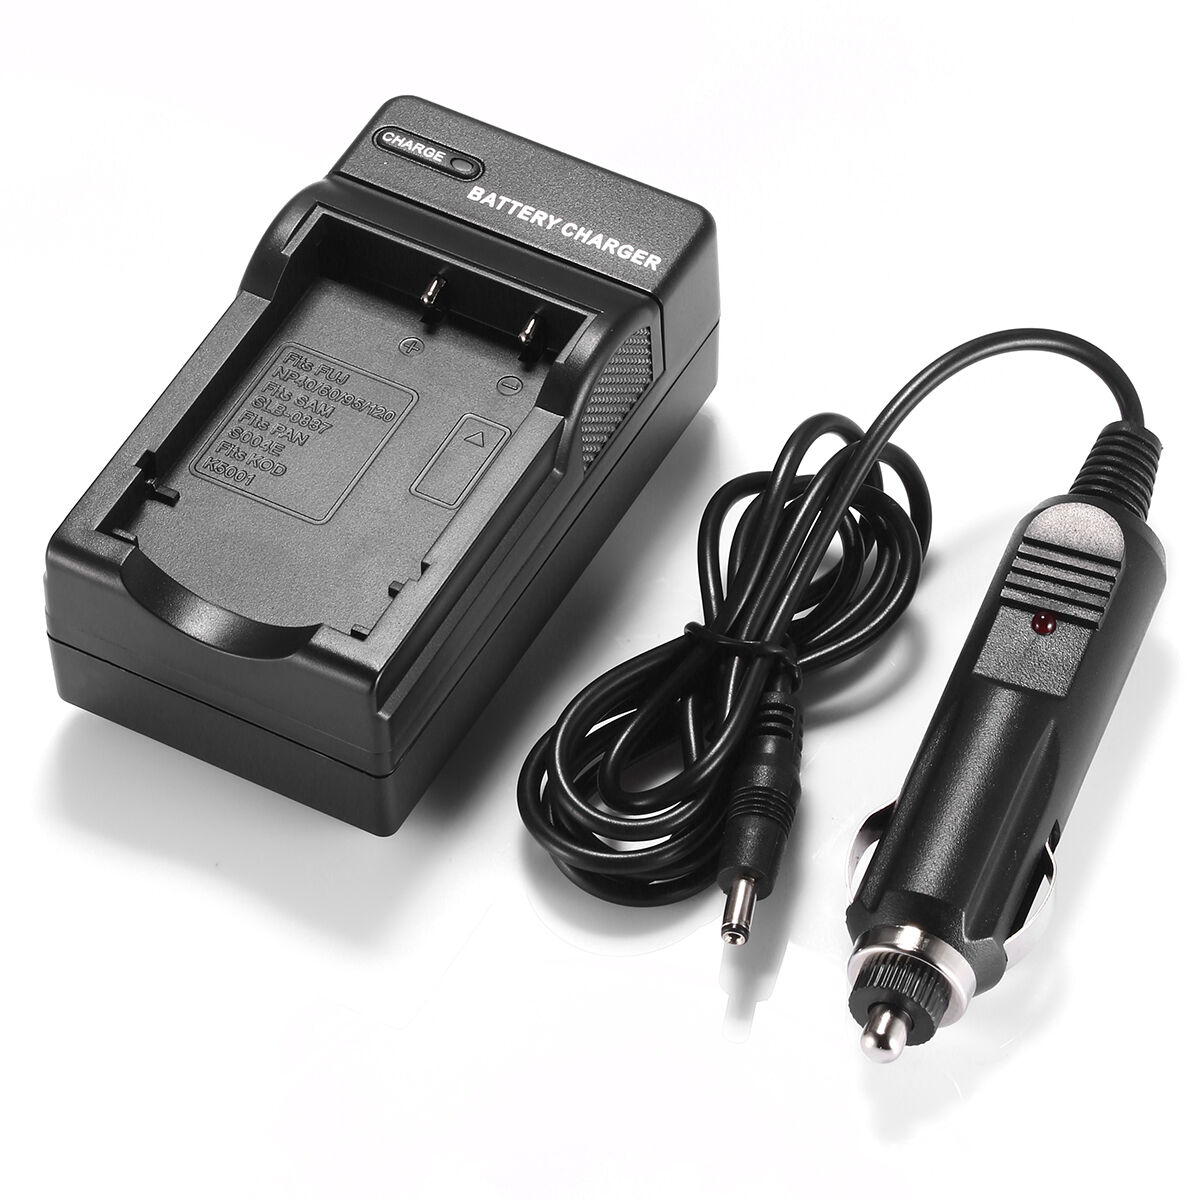 SONY Mylo COM-2 battery charger